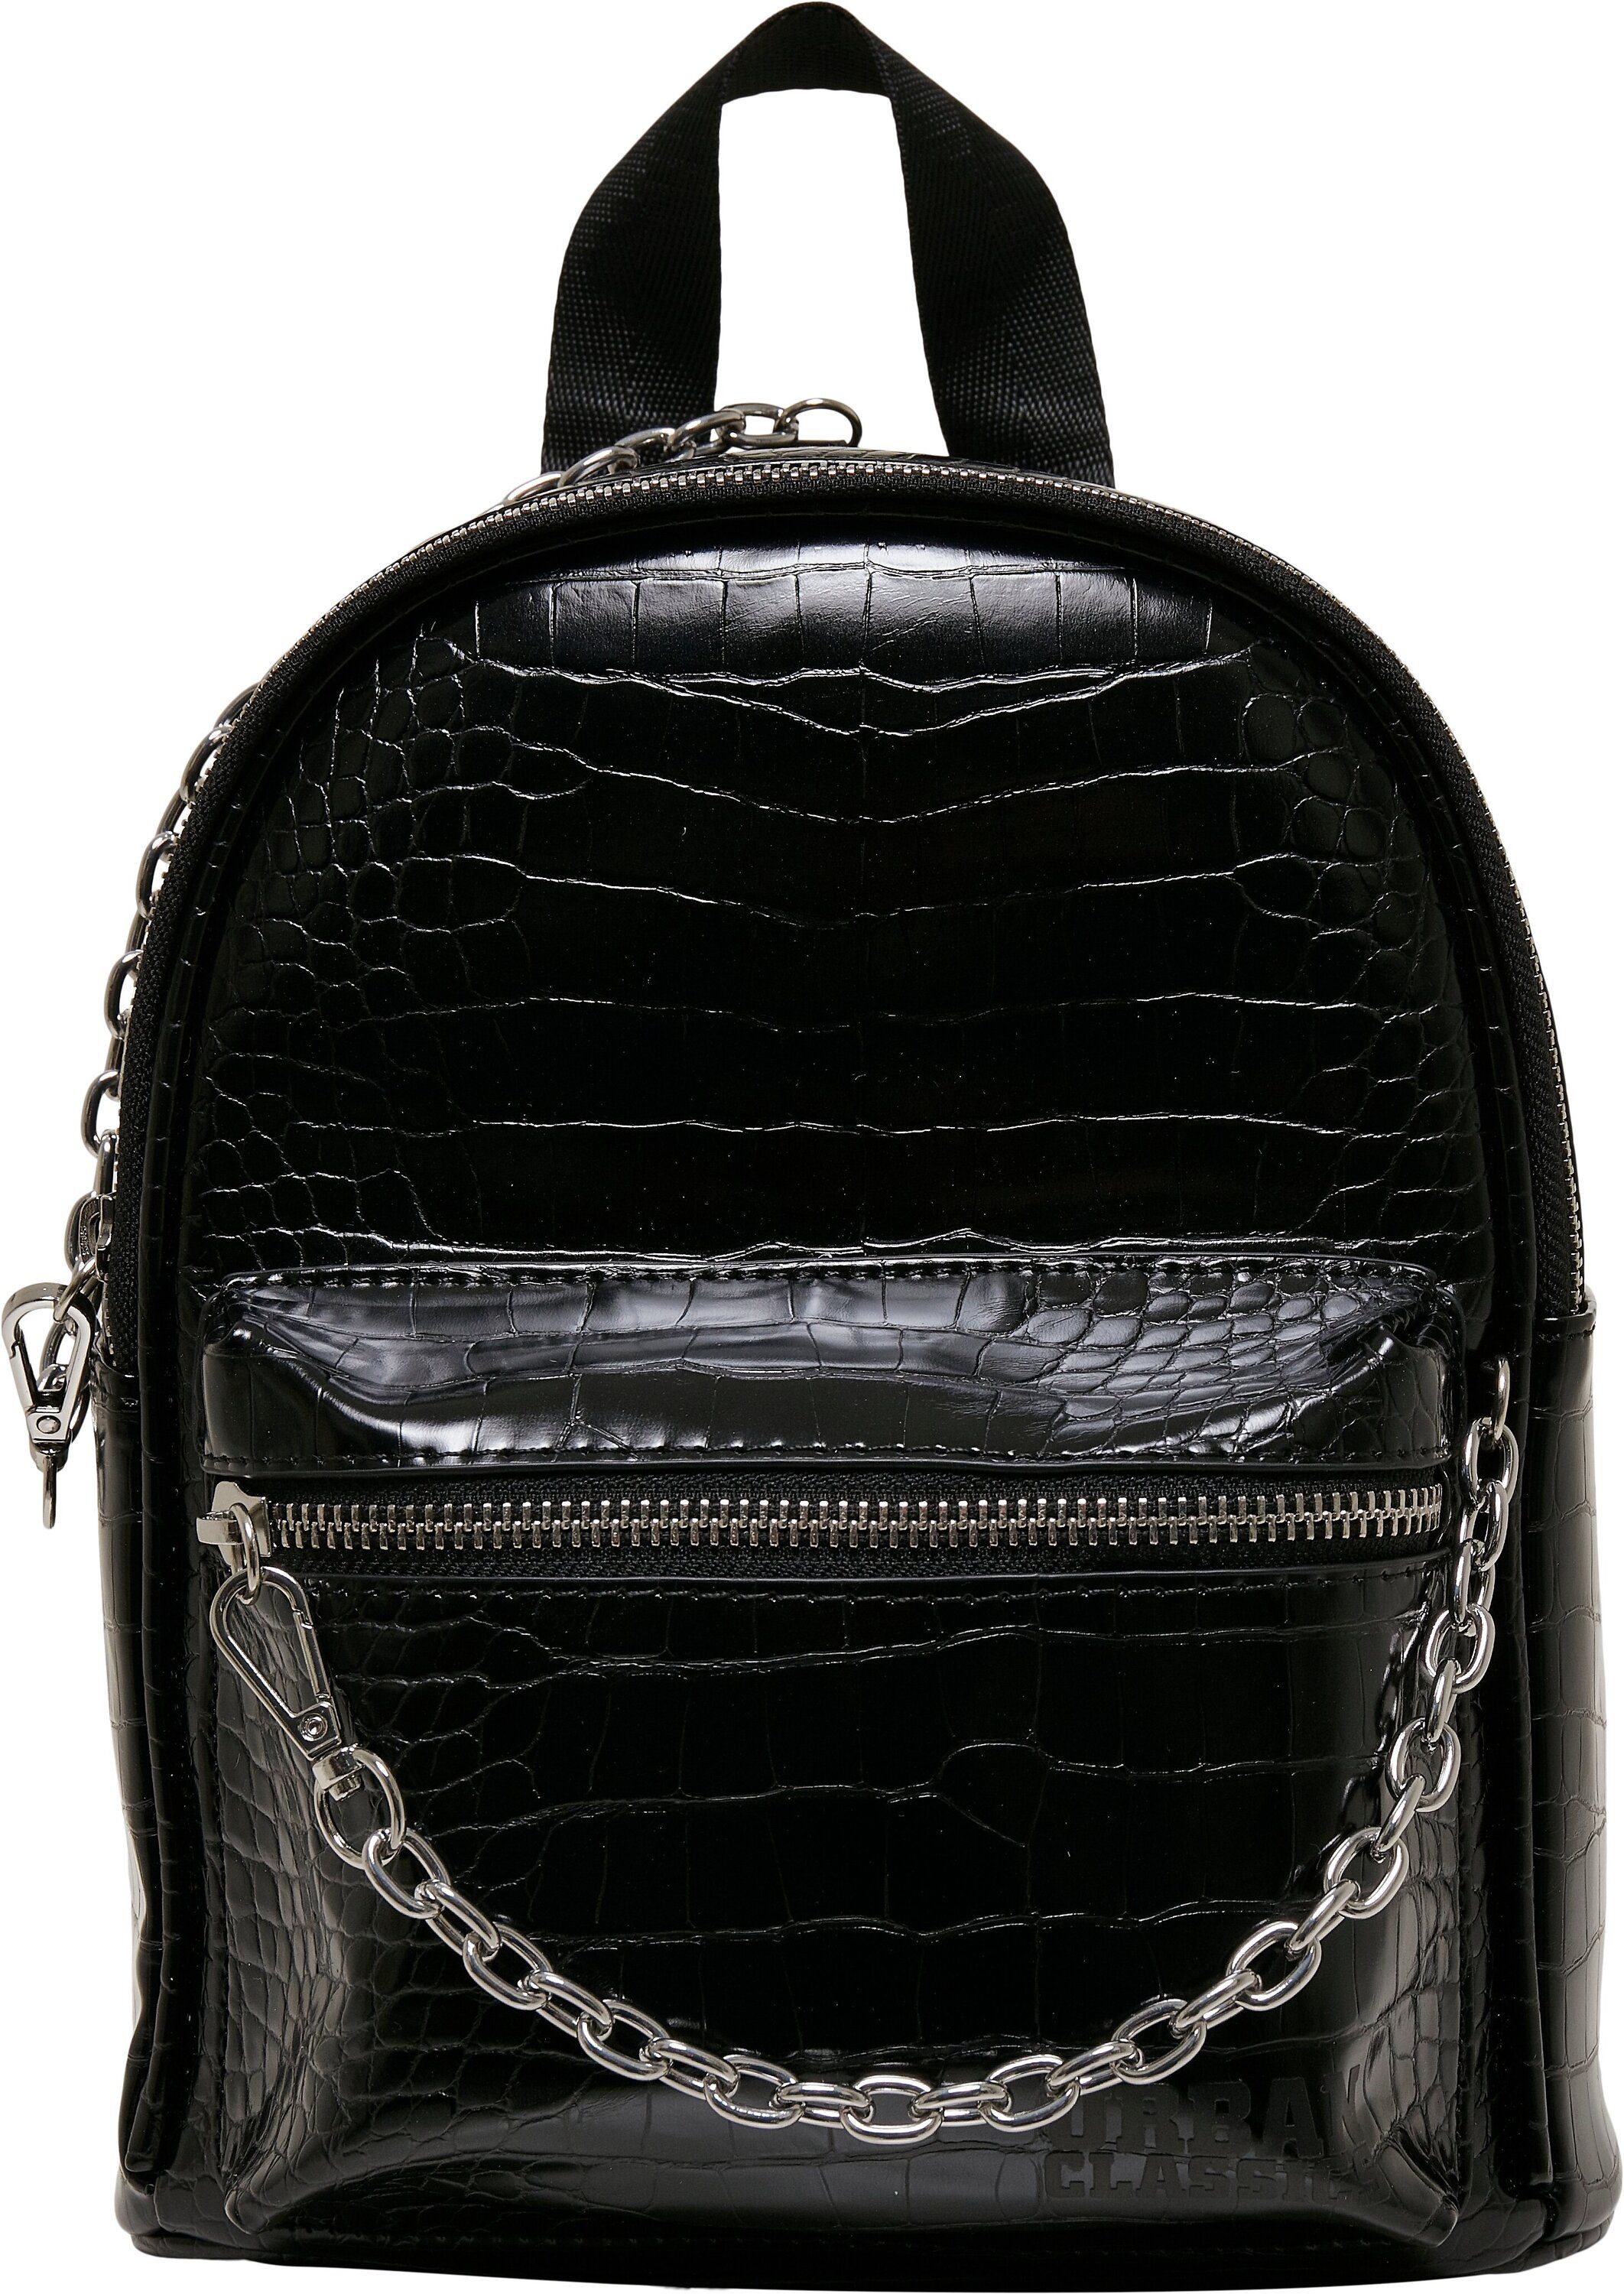 URBAN CLASSICS Rucksack Unisex Croco Synthetic Backpack Leather